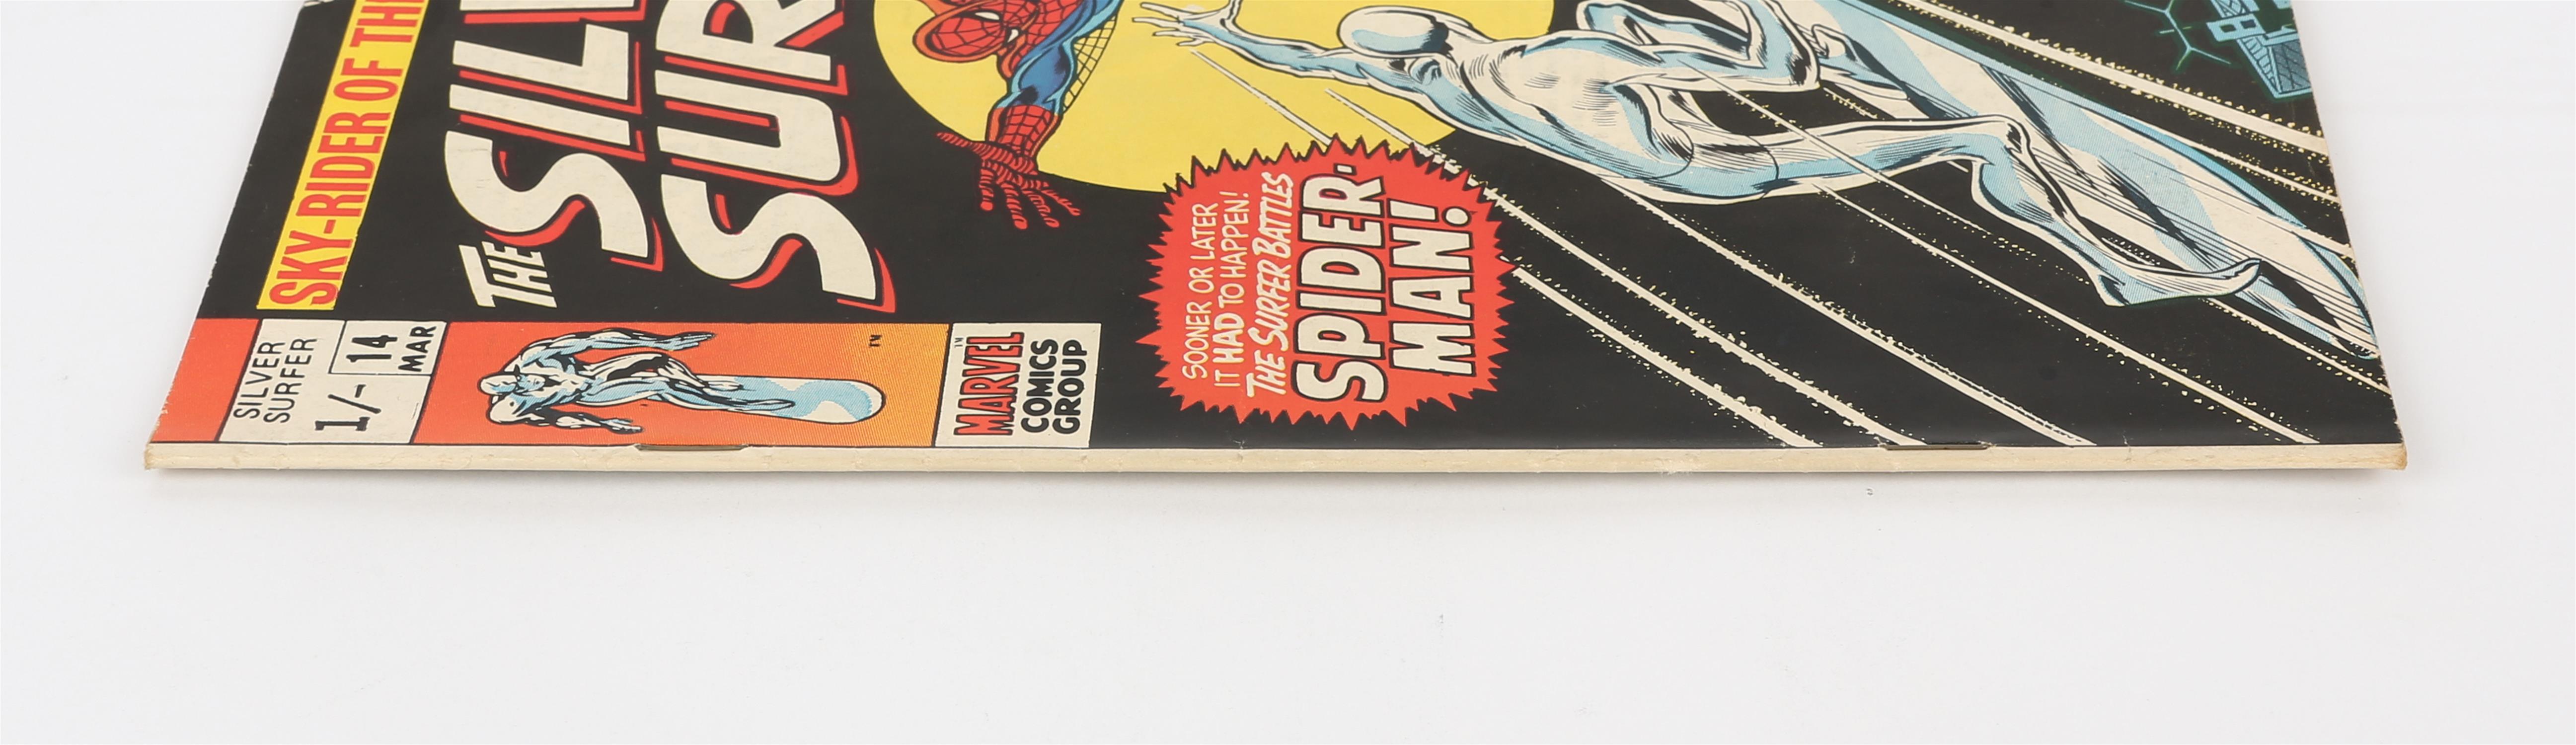 Marvel Comics: The Silver Surfer. A group of 9 issues featuring key 1st appearances and notable - Image 4 of 12